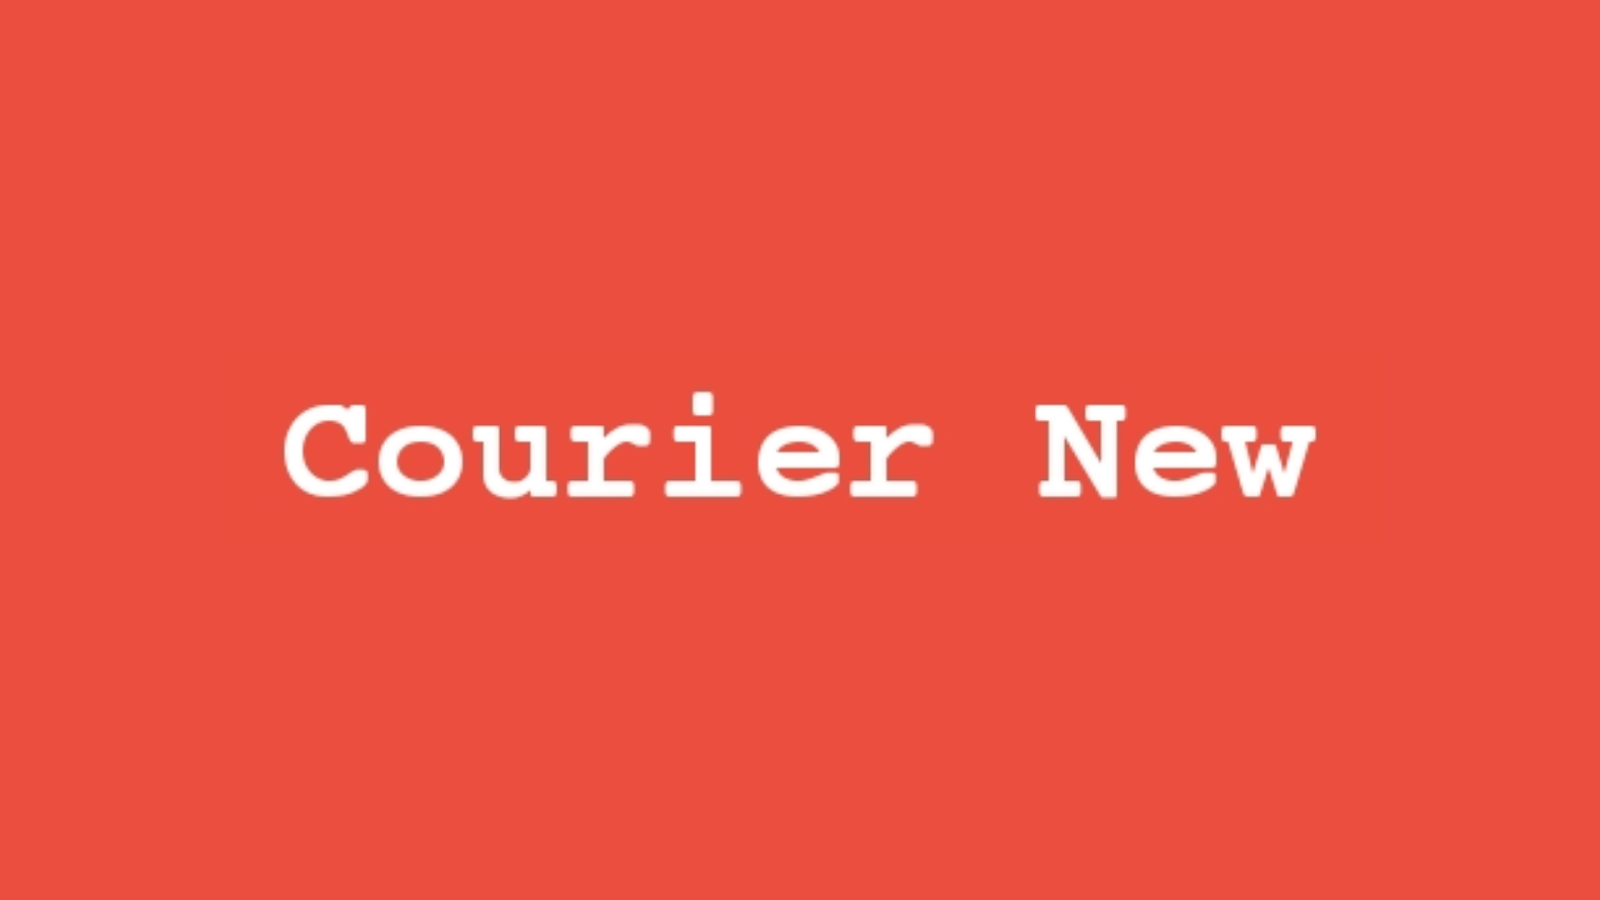 courier new youtube thumbnail font